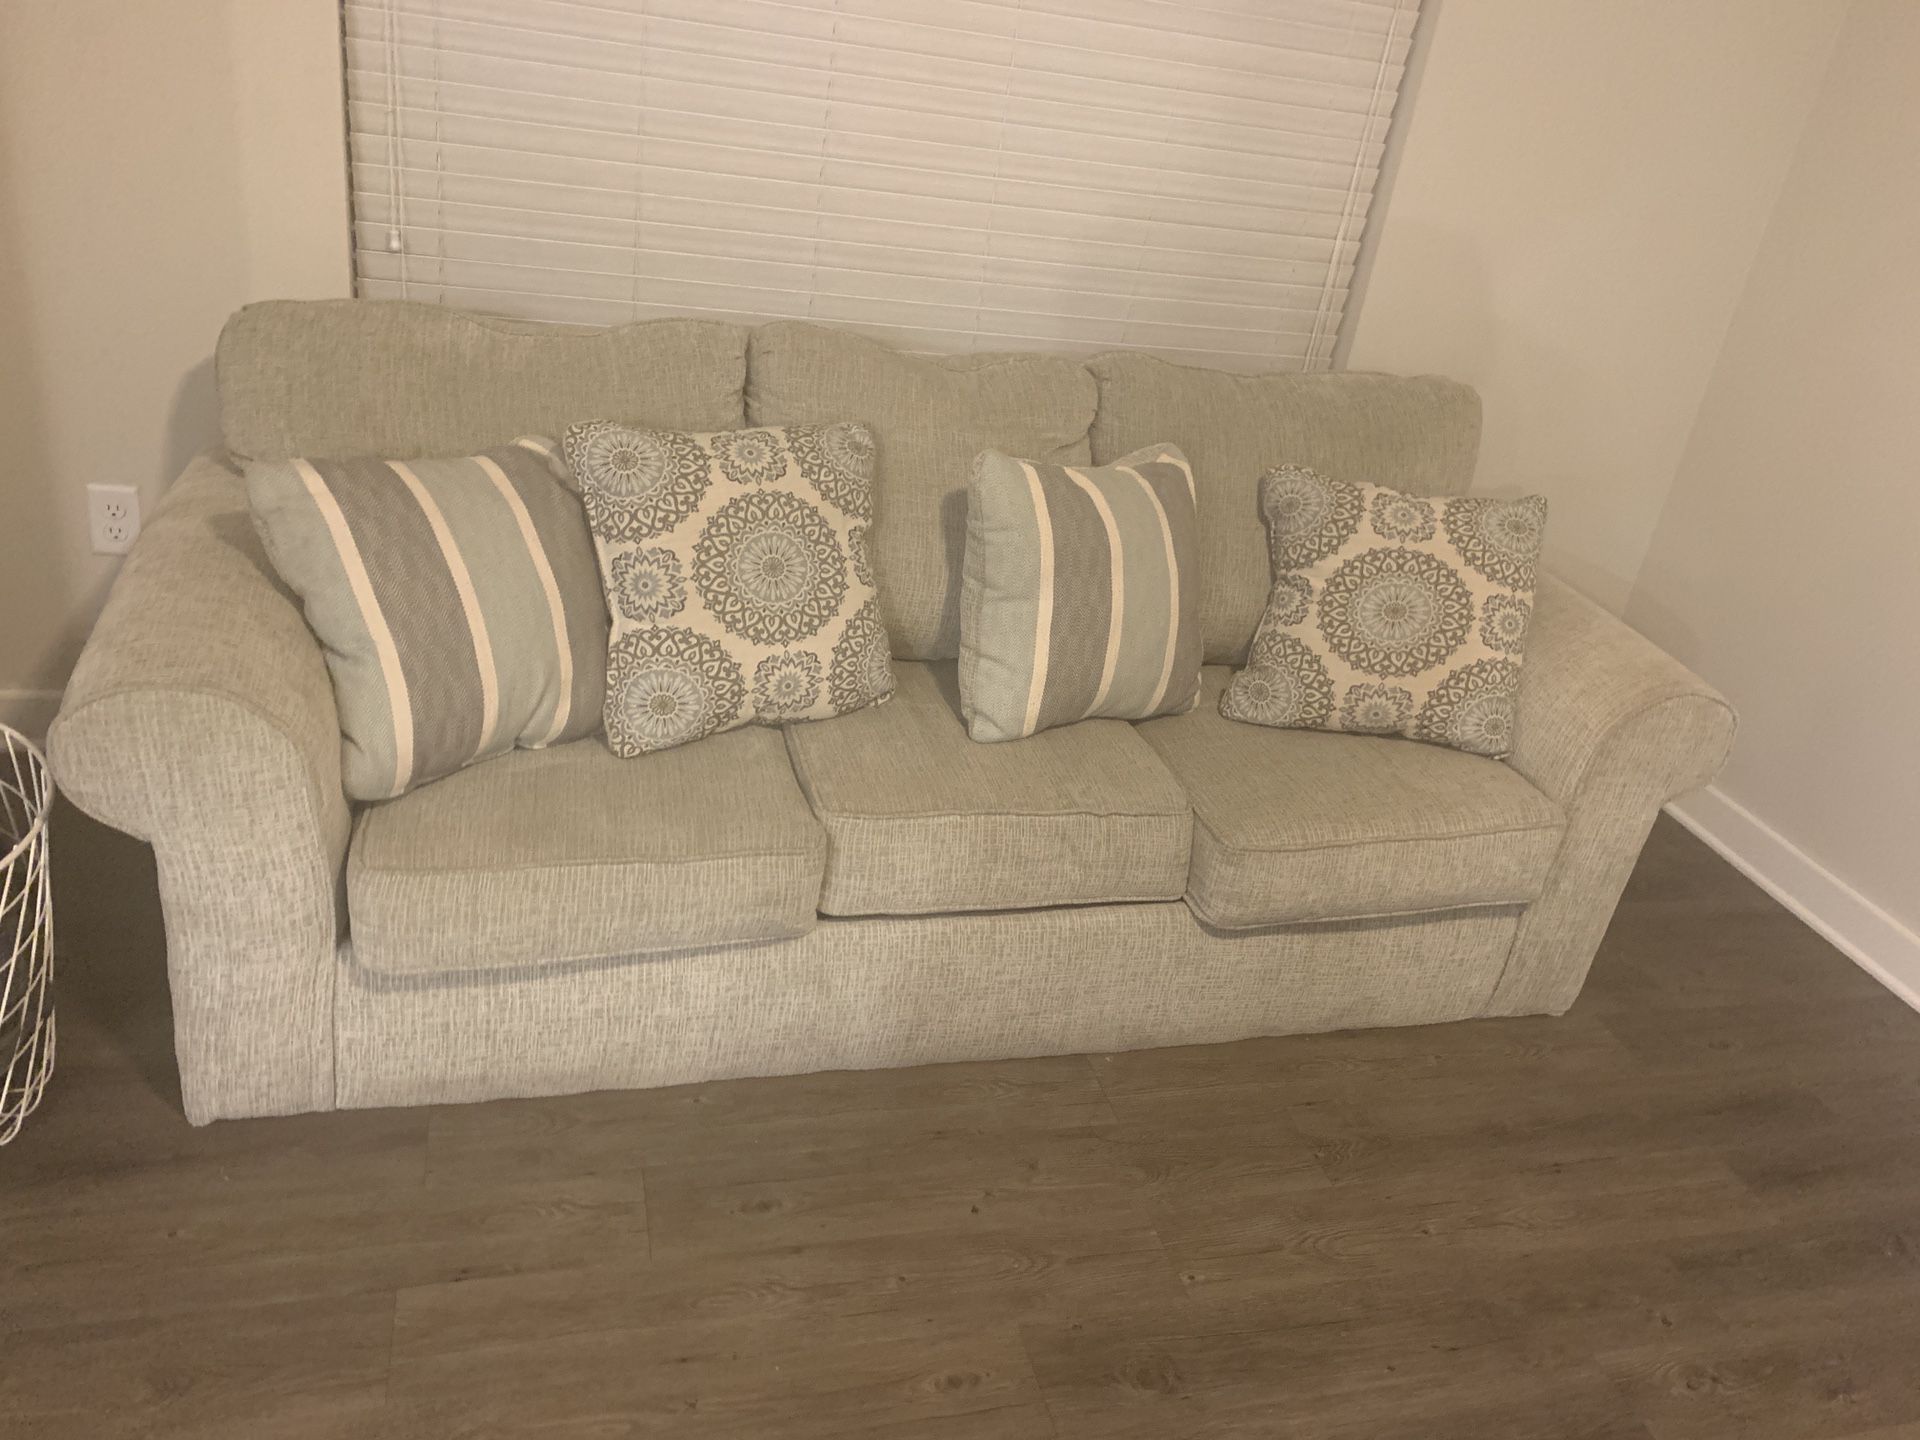 Sofa for sell! Only 6 months old